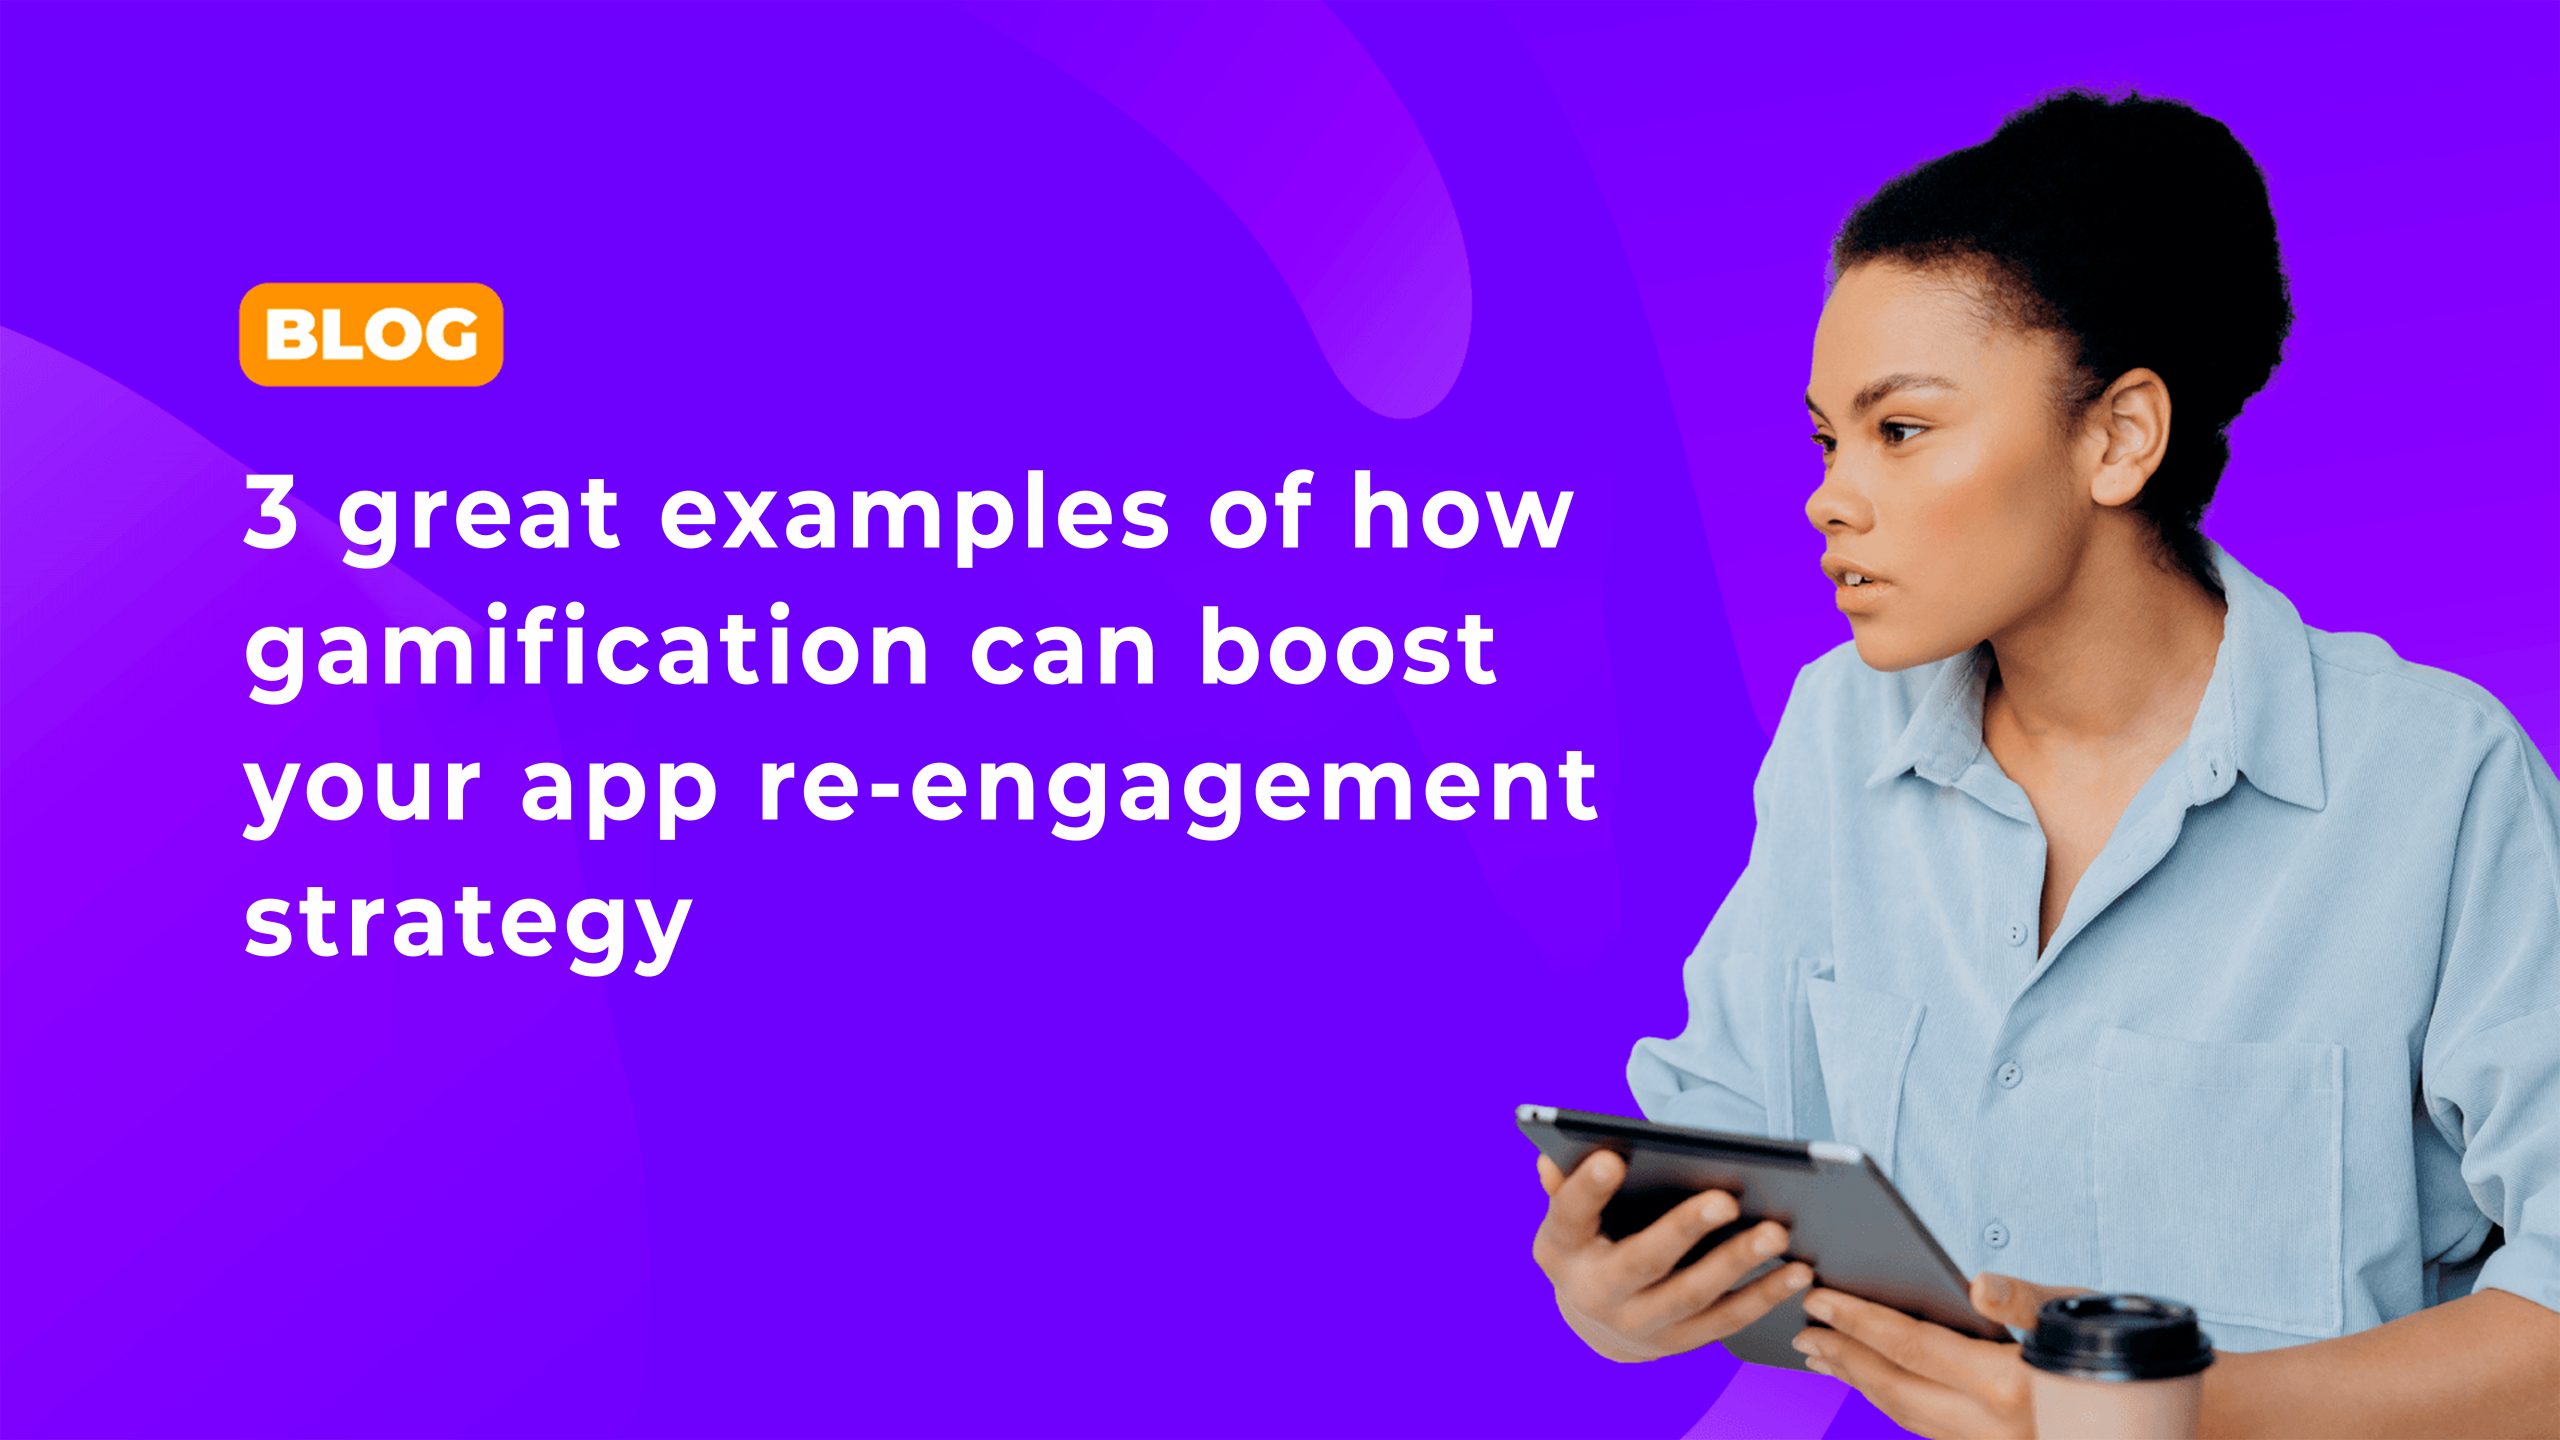 3 great examples of how gamification can boost your app re-engagement strategy